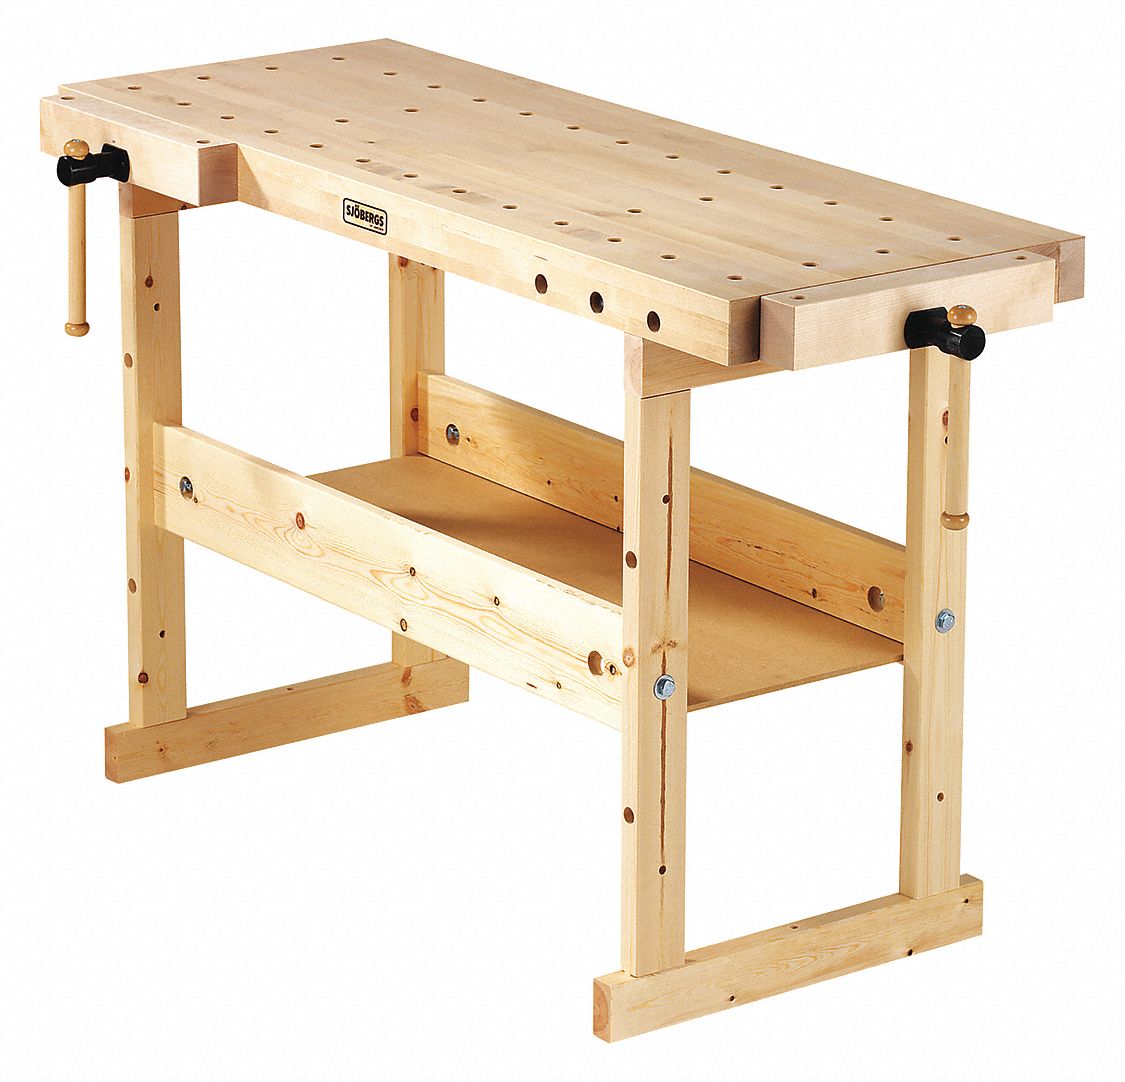 Workbench: Fixed Ht, Birch, 57 in x 24 in, 200 lb Overall Load Capacity, Tan